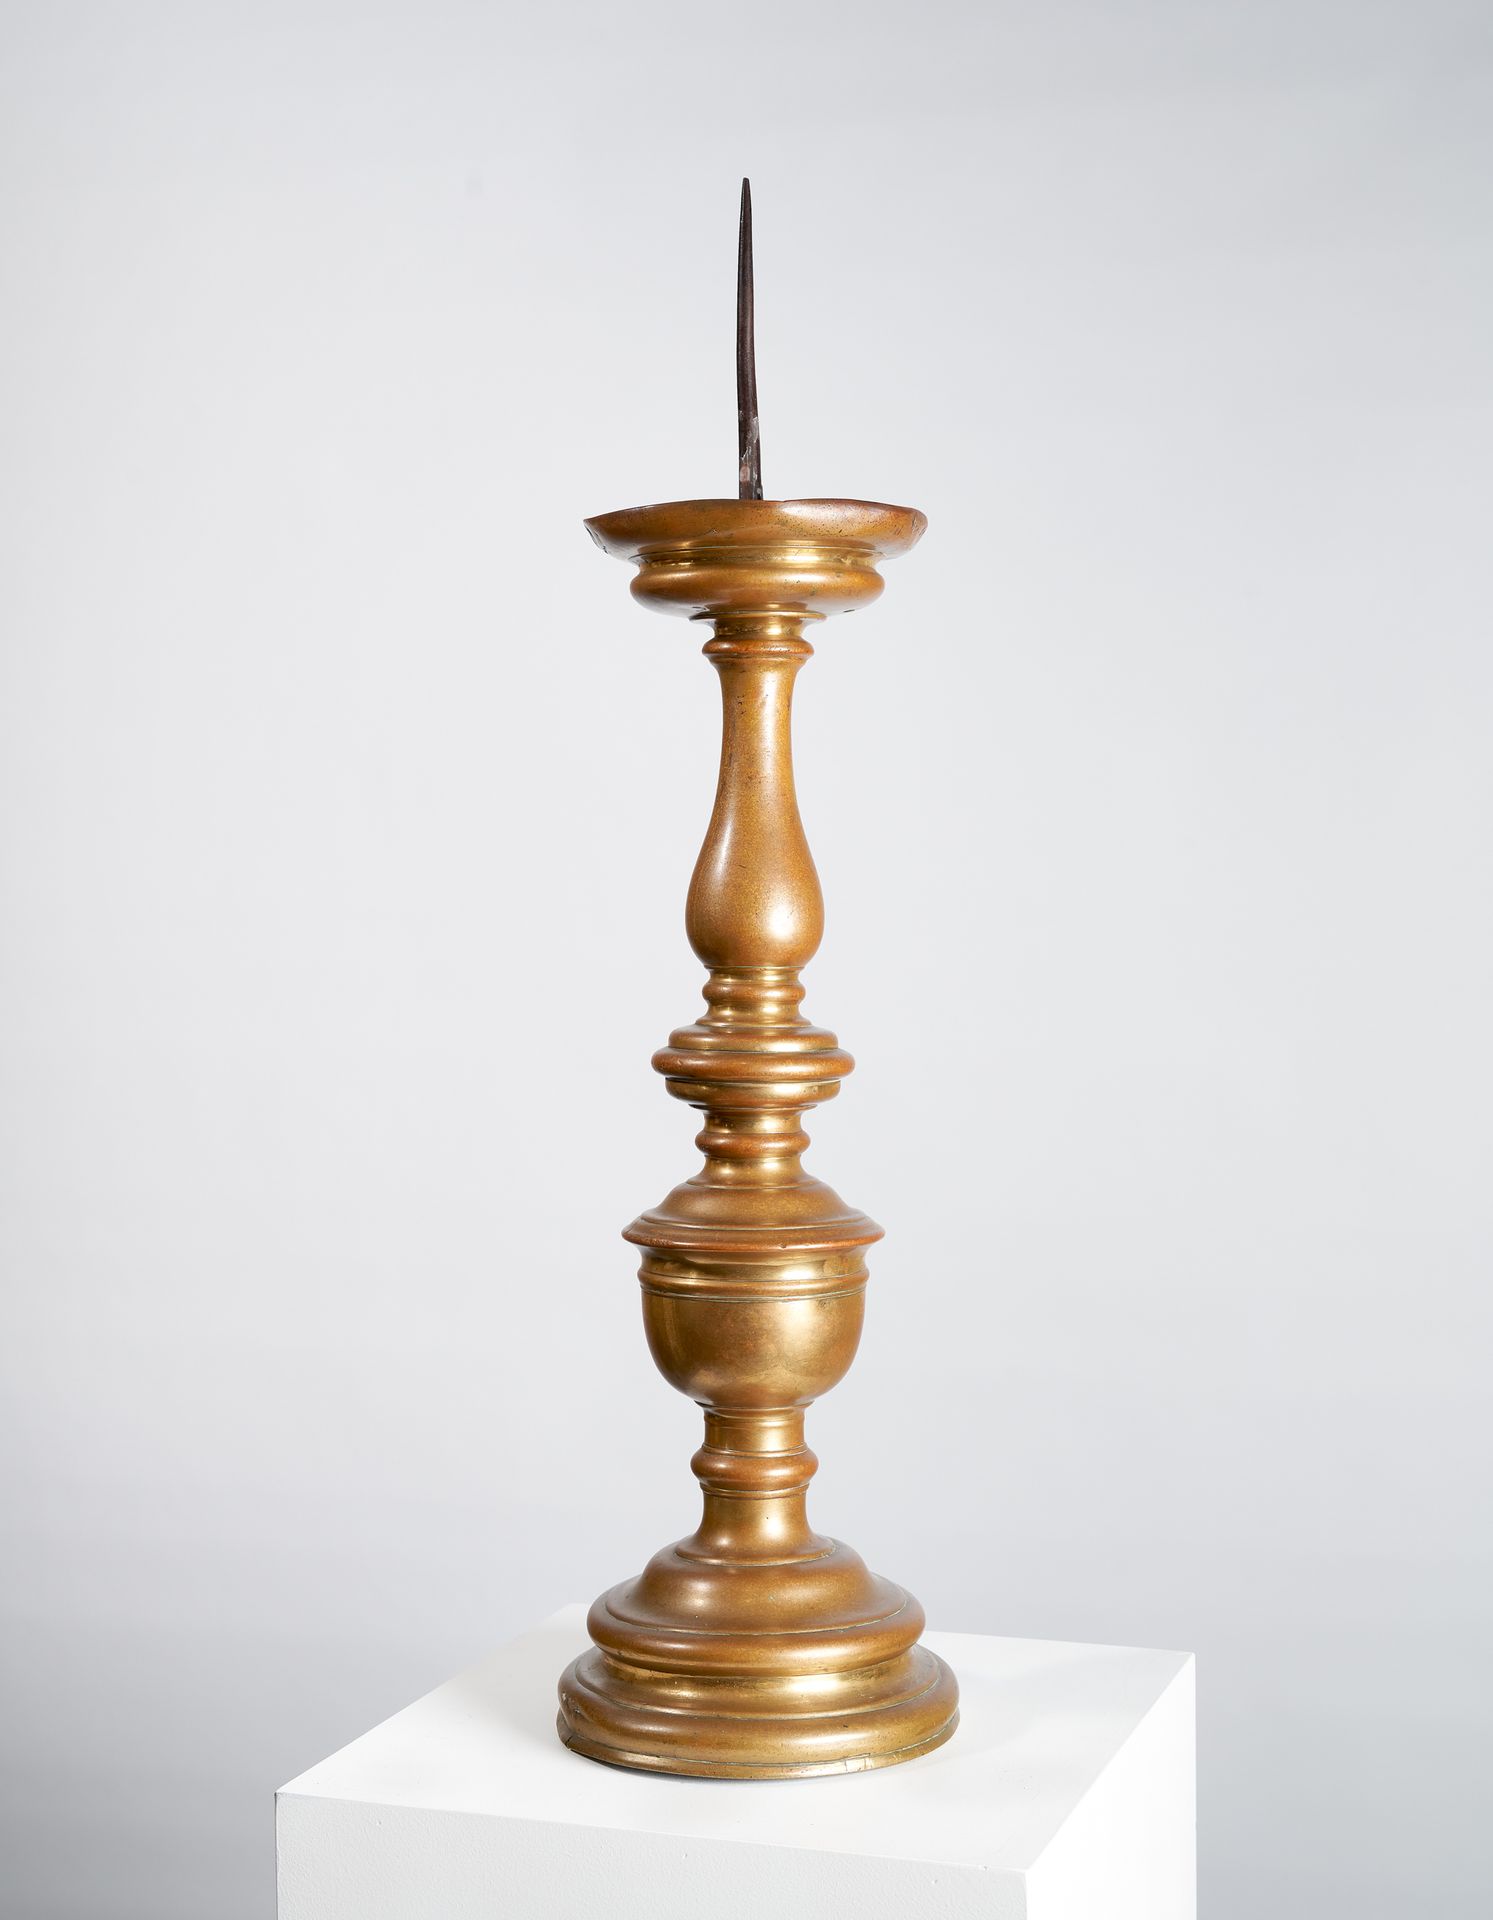 Null LARGE BRONZE CANDLE STICK

18th century 

H: 77 cm